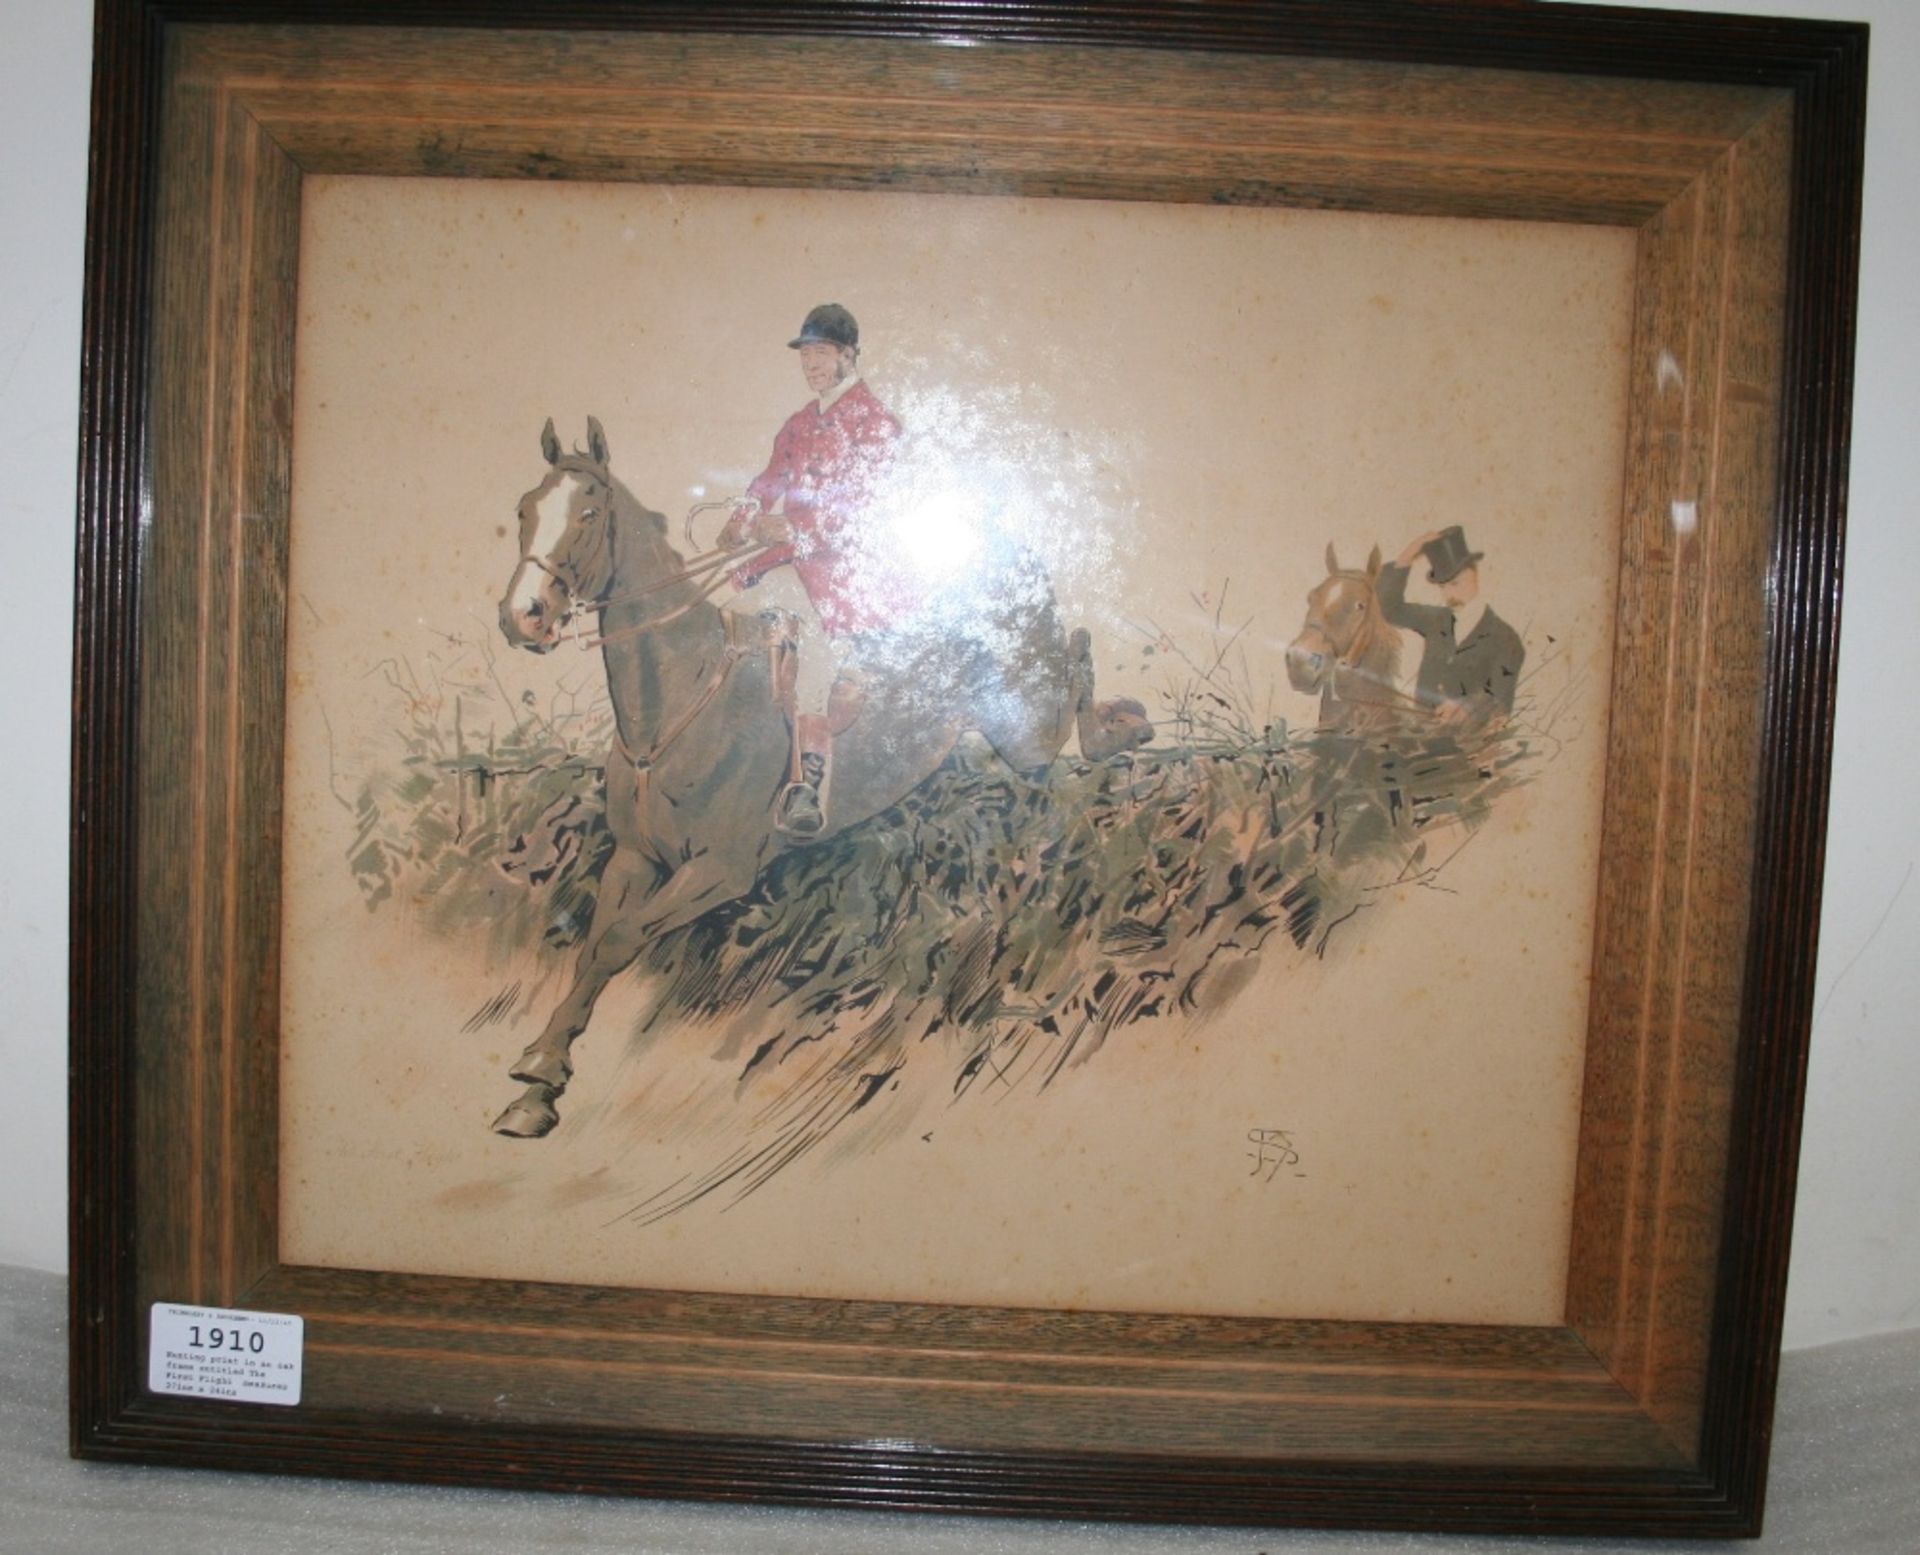 Hunting print in an oak frame entitled The First Flight, image measures 44 x 52 cms